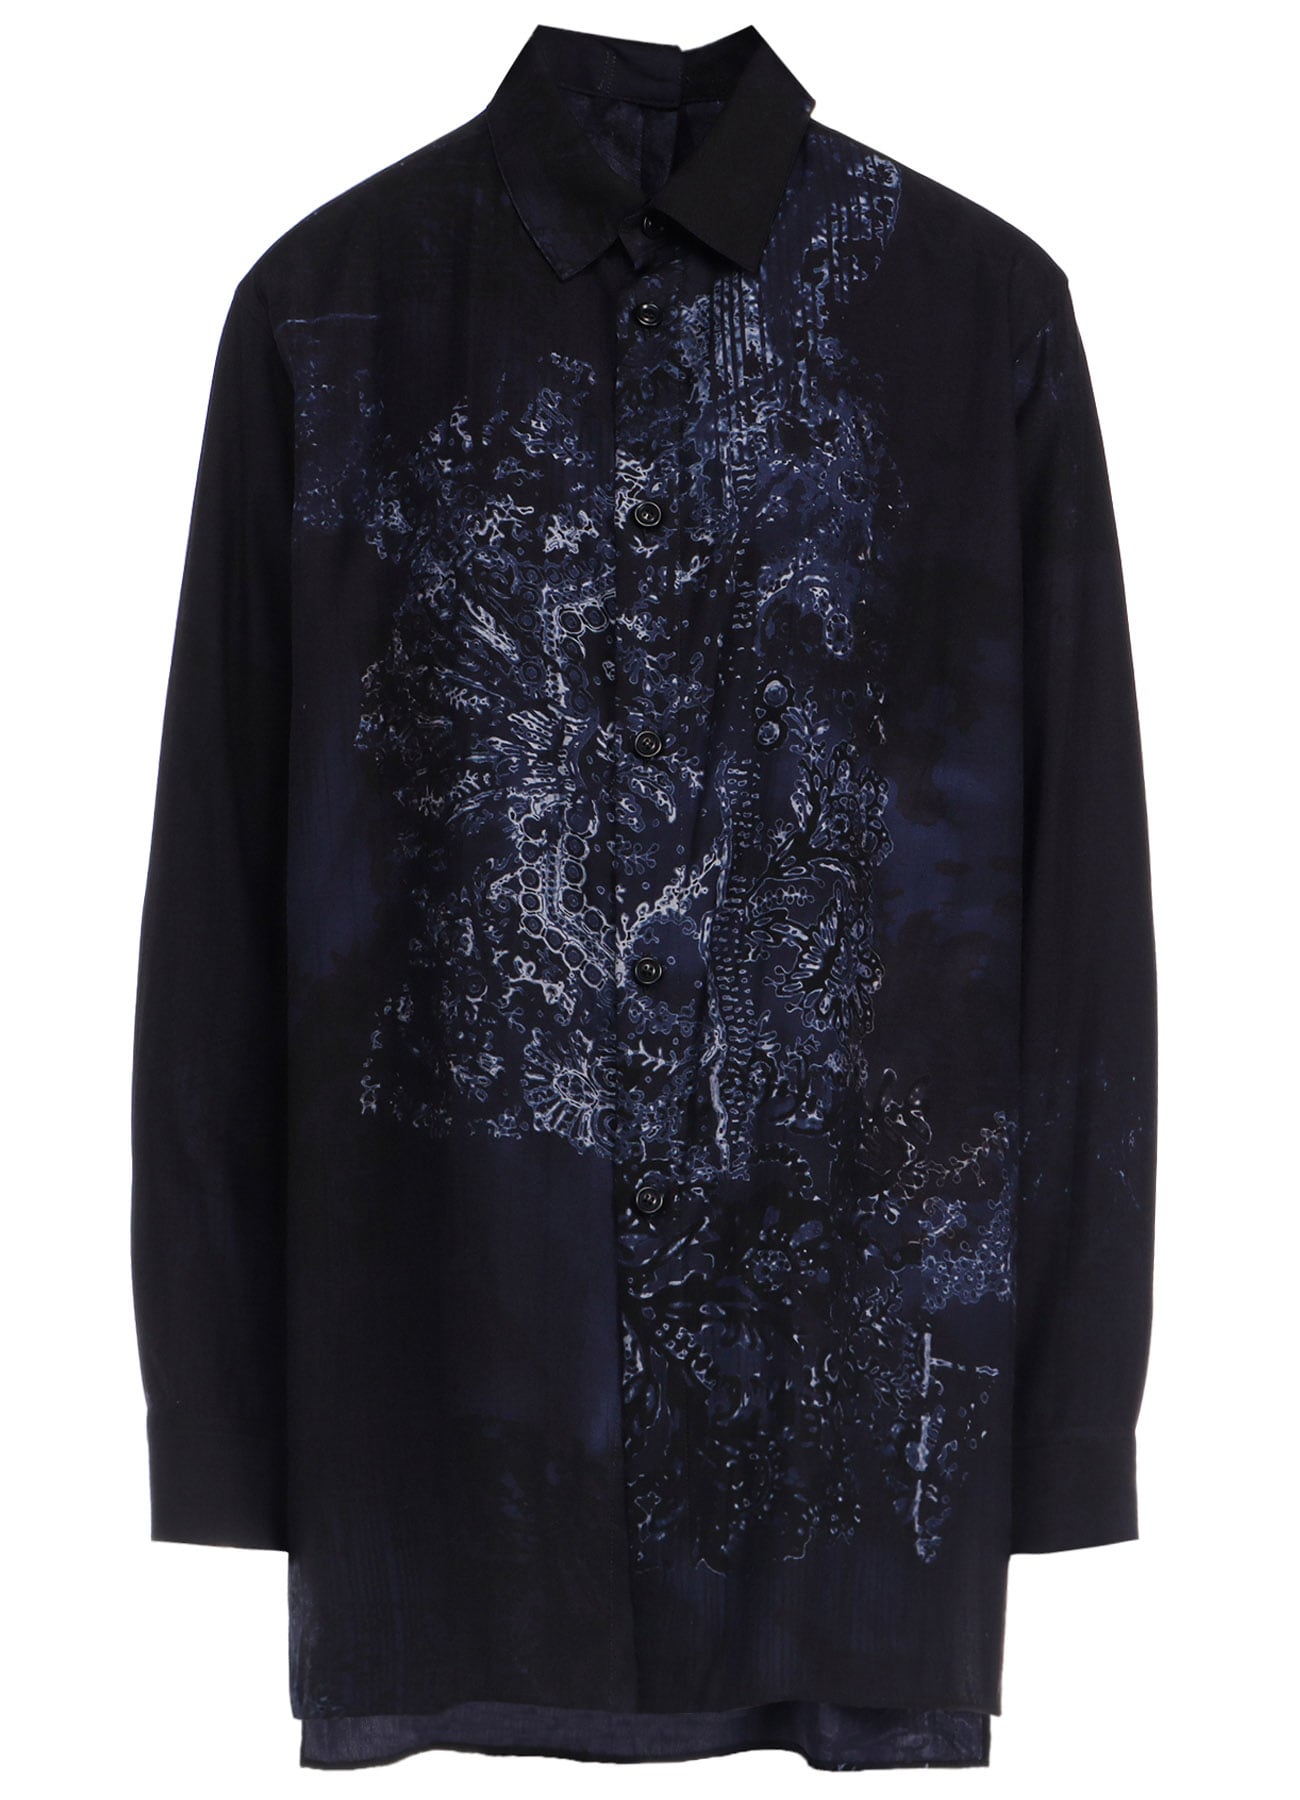 【8/2 12:00(JST) Release】CU/ TWILL LACE DESIGN PT BACK TUCKED OPEN BLOUSE